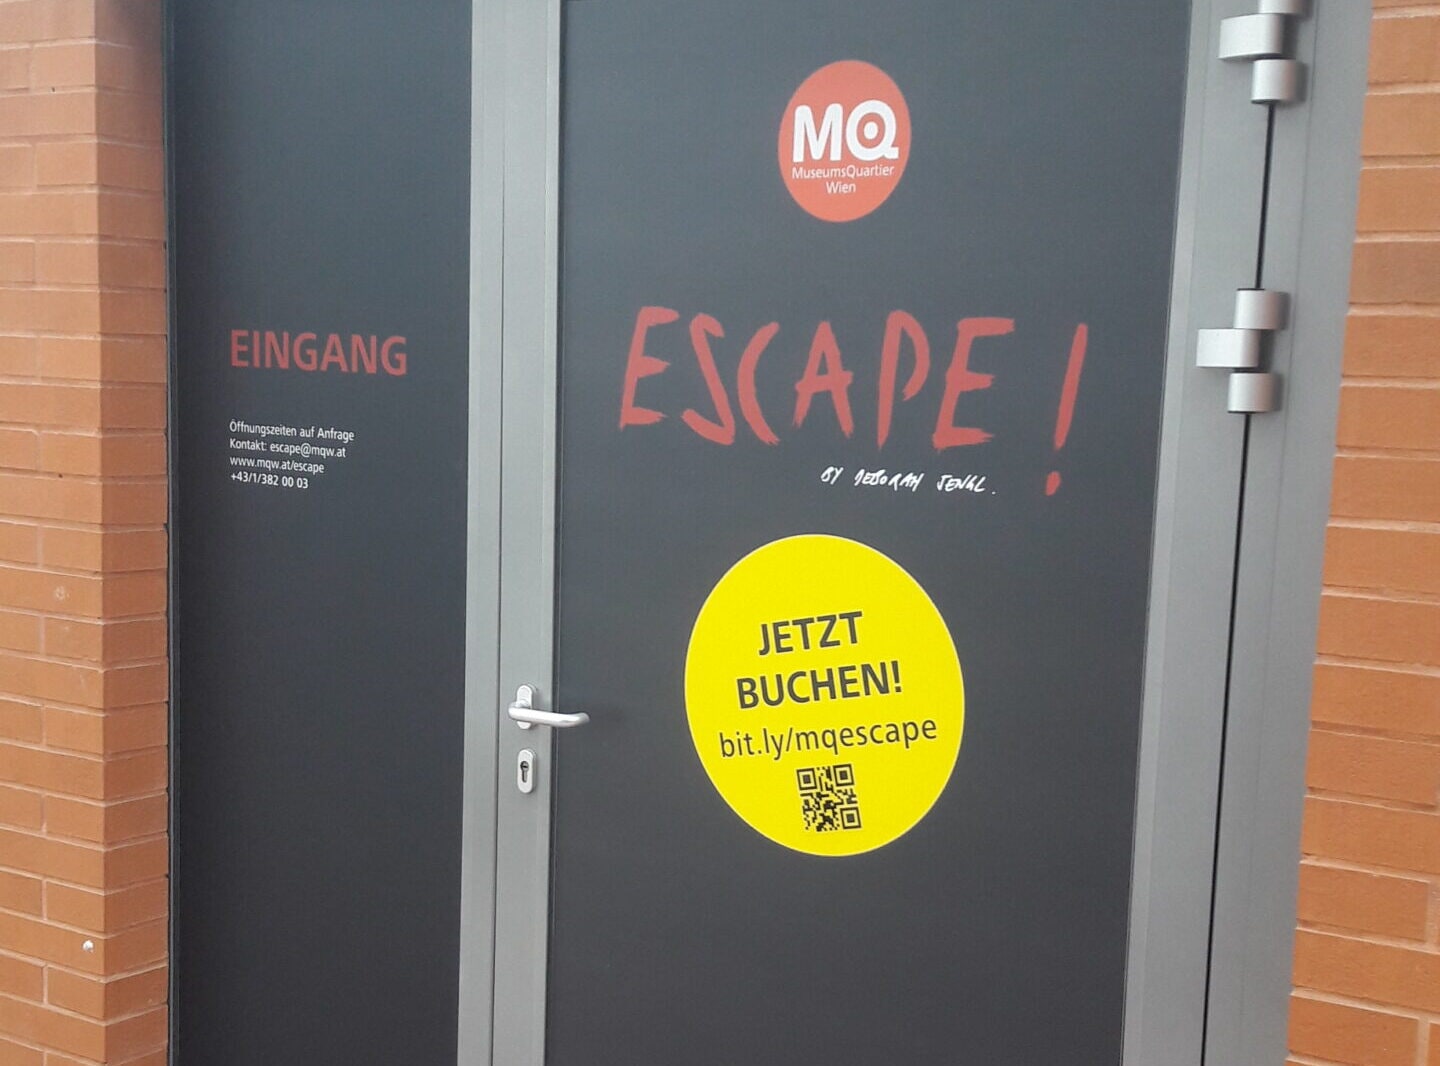 Eingang zum Escape Room Time-Busters Wien im Museumsquarter